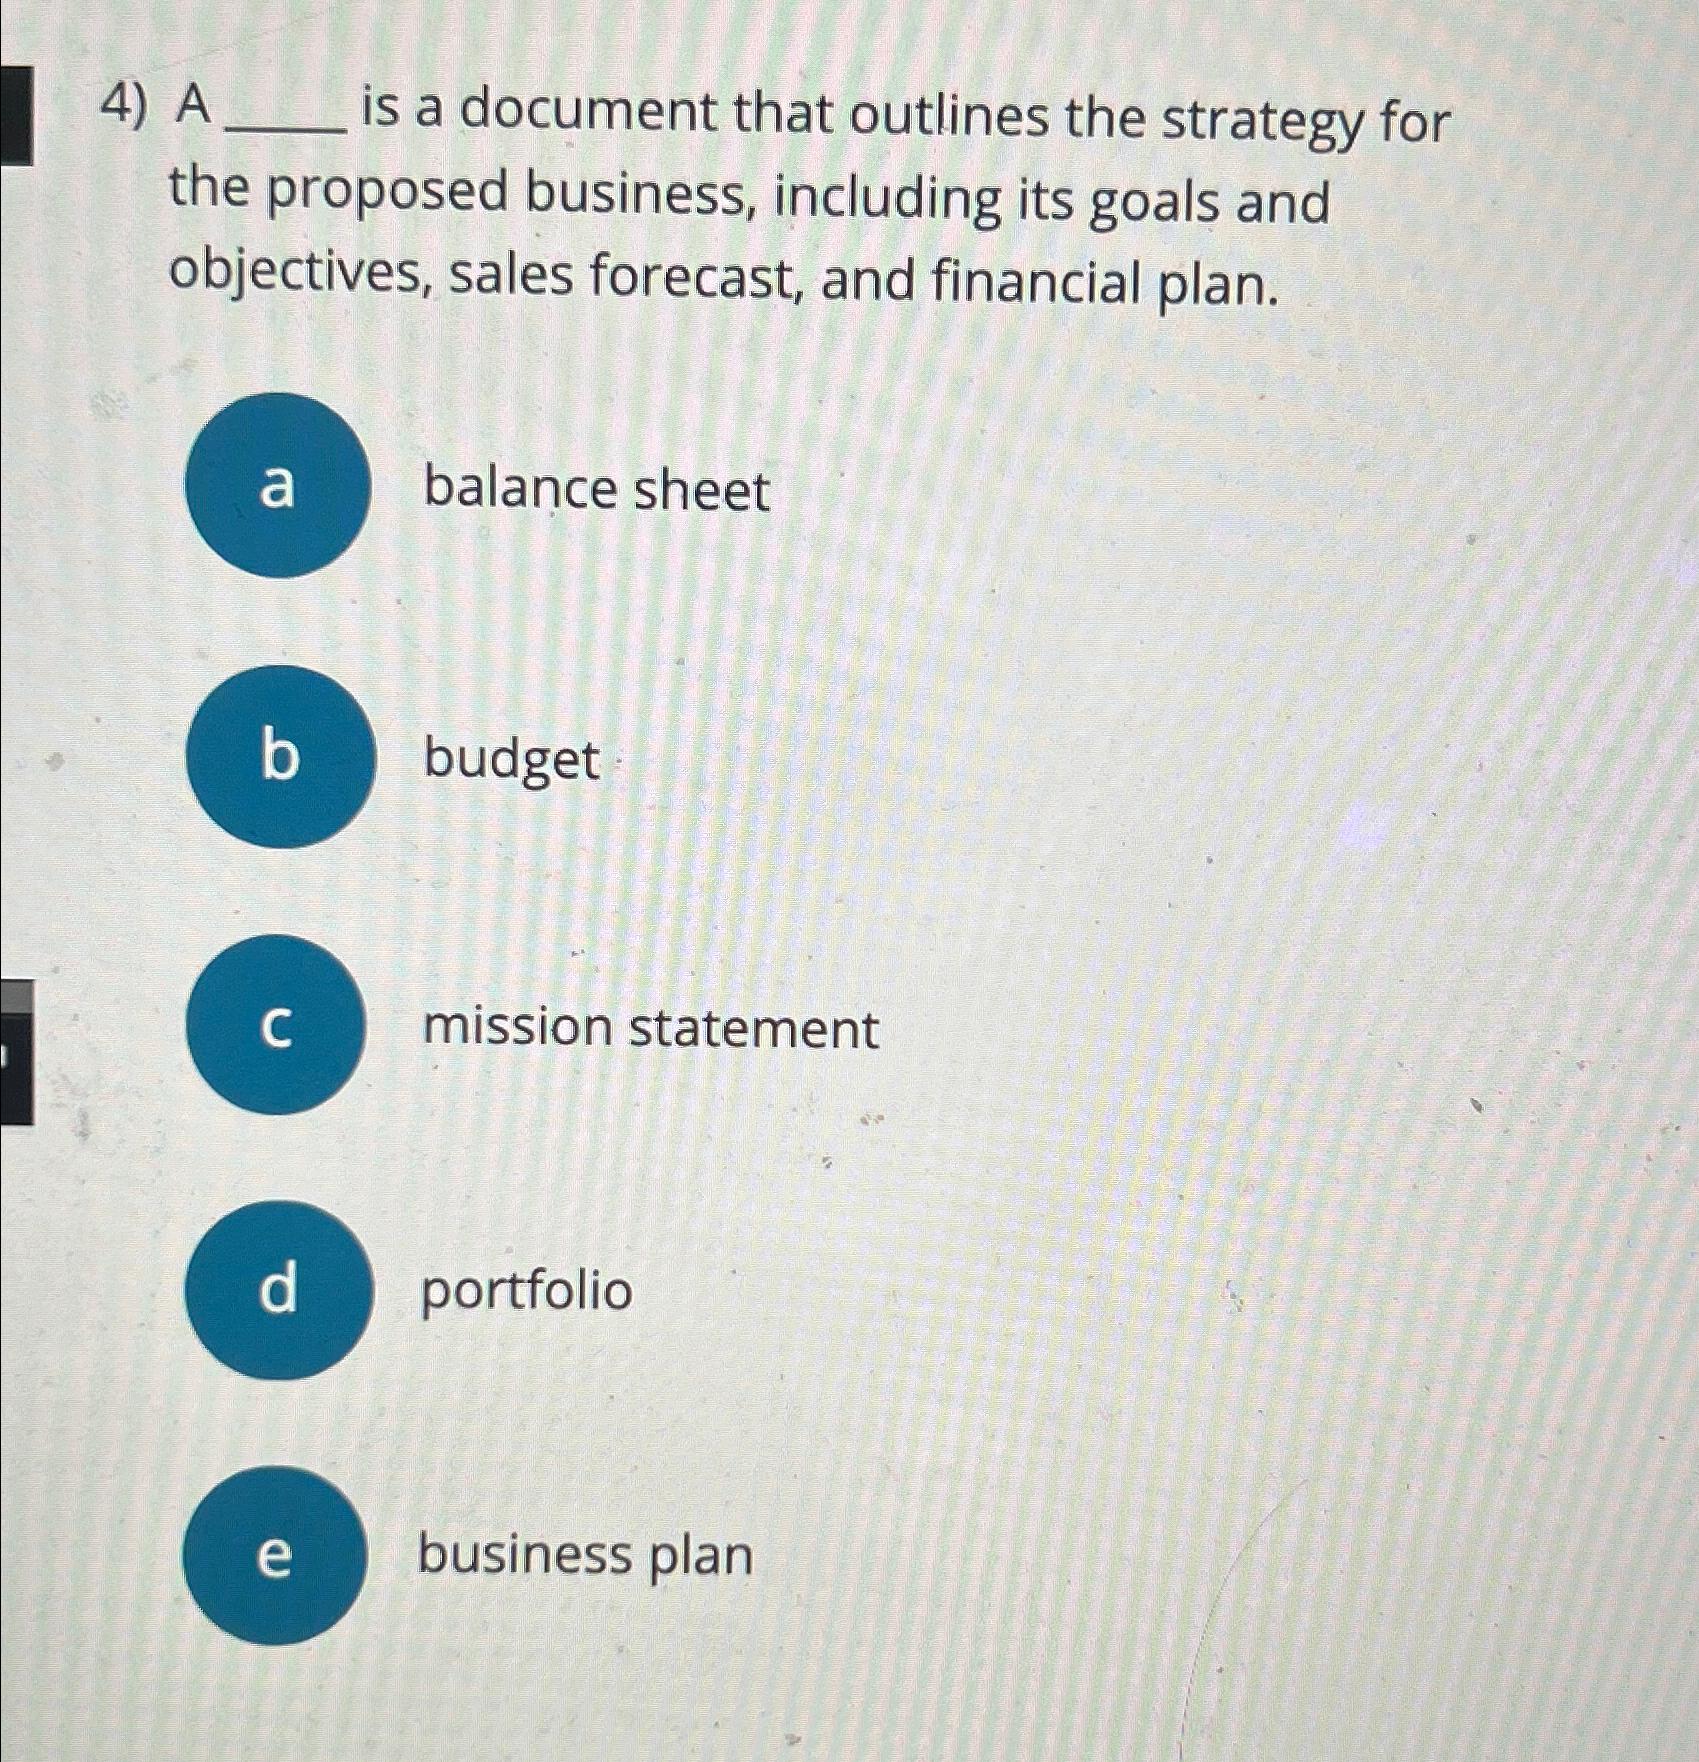 a business plan is a document that outlines